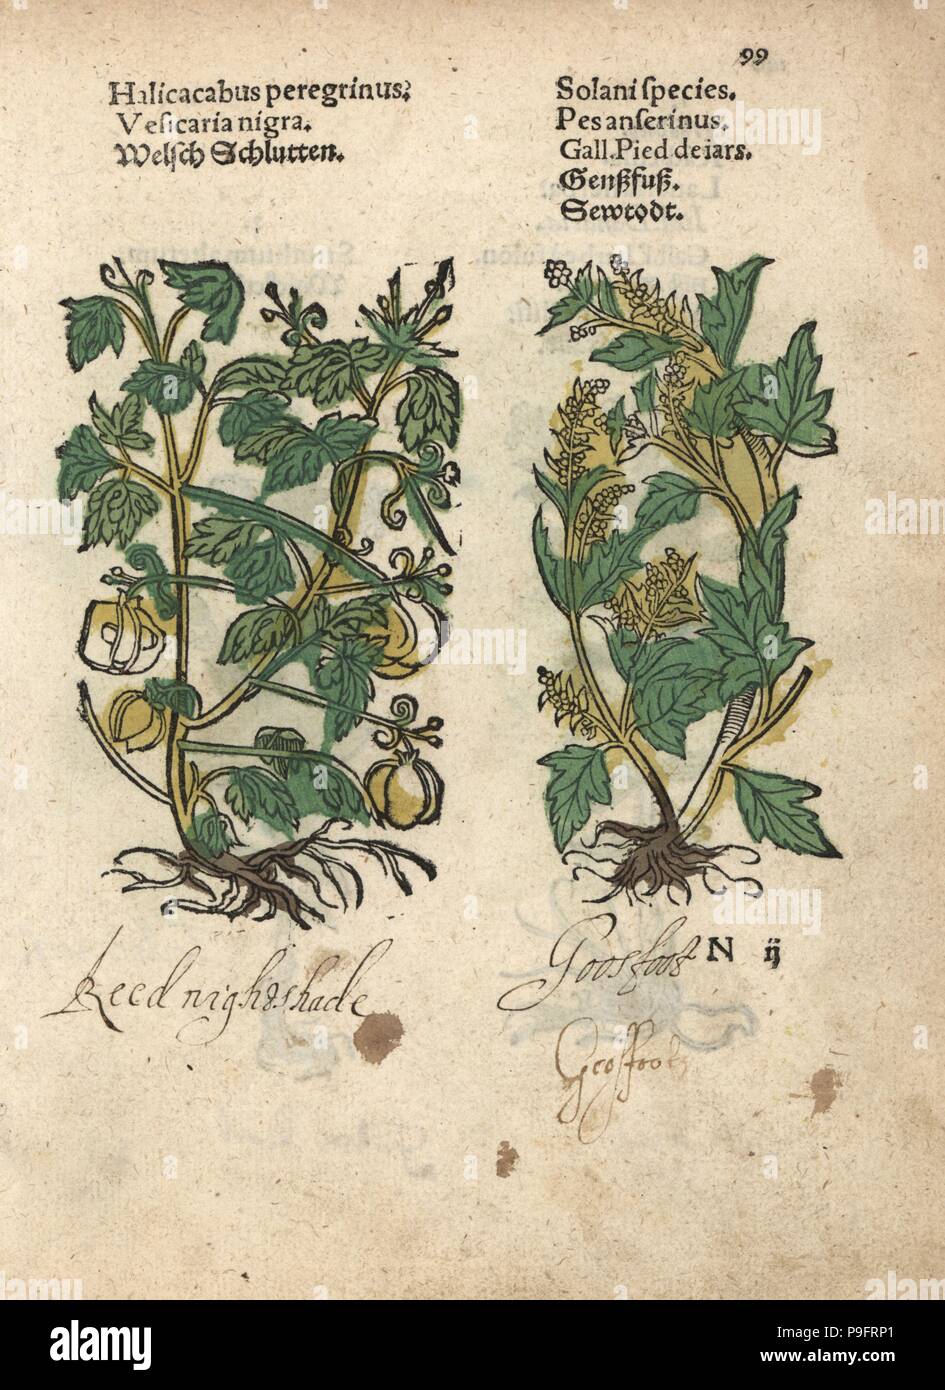 Balloon plant, Cardiospermum halicacabum, and goosefoot, Chenopodium species. Handcoloured woodblock engraving of a botanical illustration from Adam Lonicer's Krauterbuch, or Herbal, Frankfurt, 1557. This from a 17th century pirate edition or atlas of illustrations only, with captions in Latin, Greek, French, Italian, German, and in English manuscript. Stock Photo